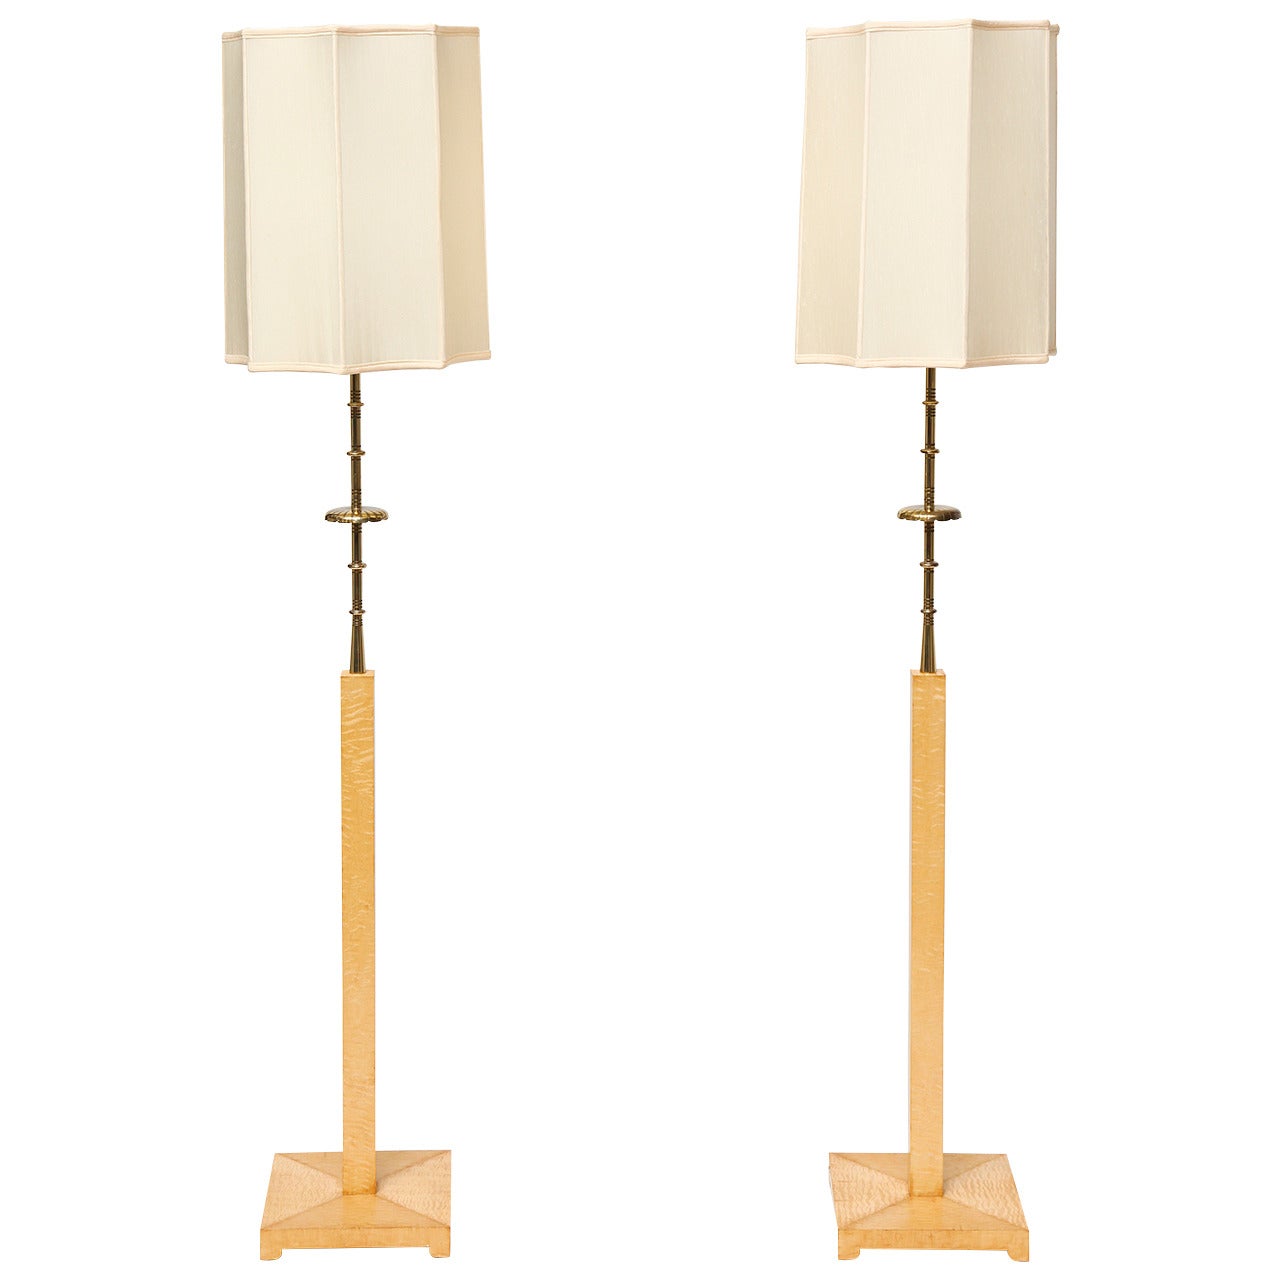 Pair of Maple Floor Lamps by Tommi Parzinger